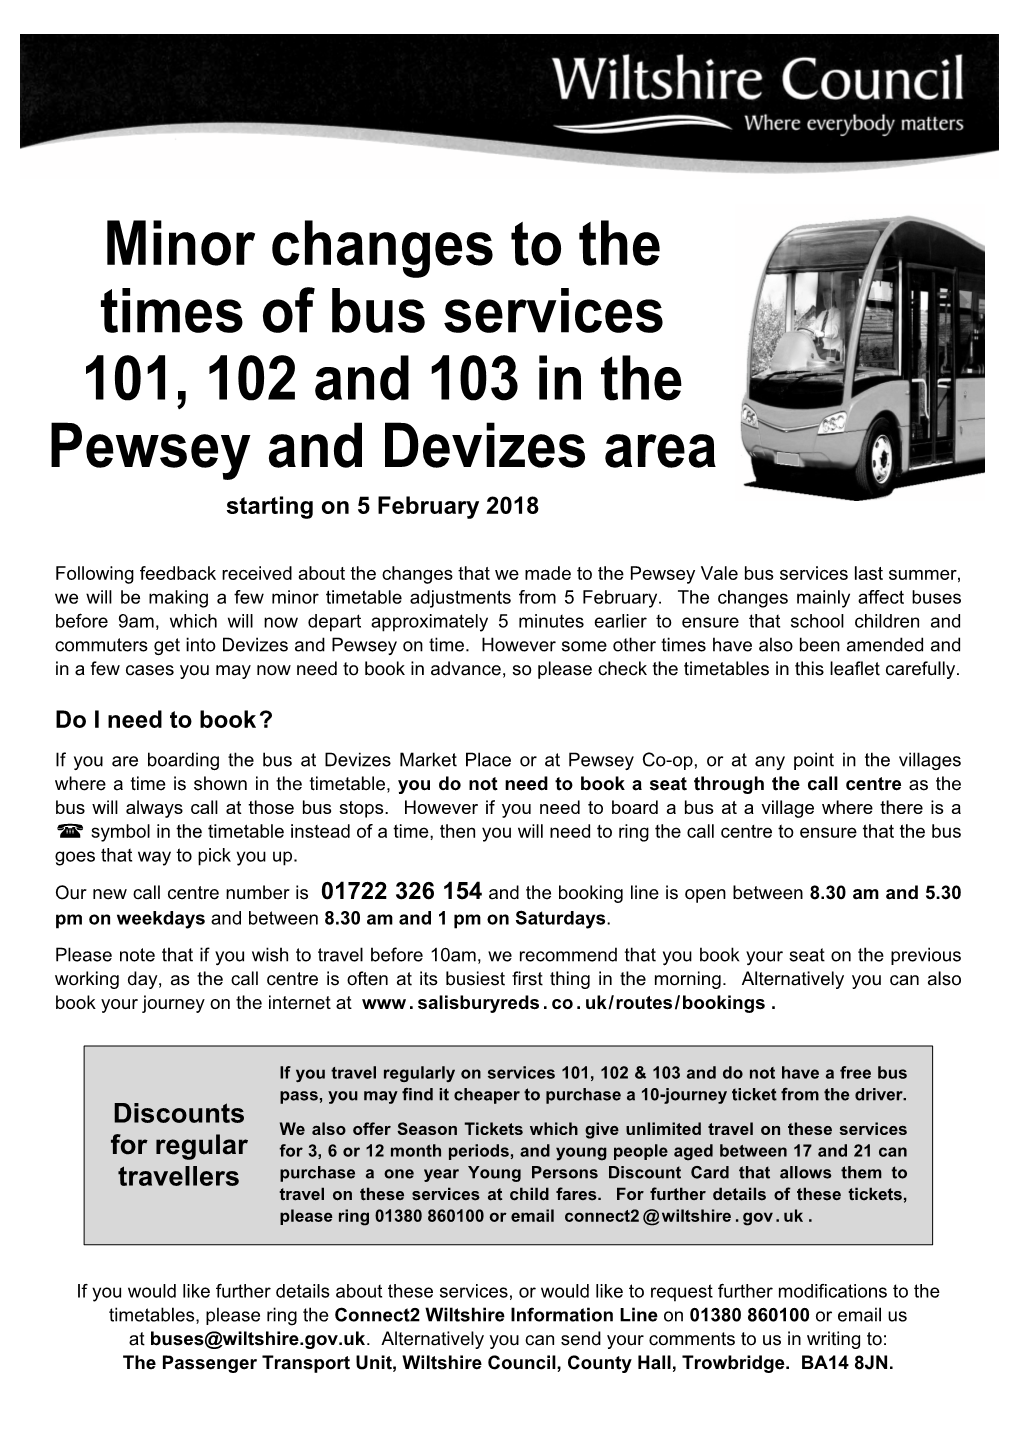 Minor Changes to the Times of Bus Services 101, 102 and 103 in the Pewsey and Devizes Area